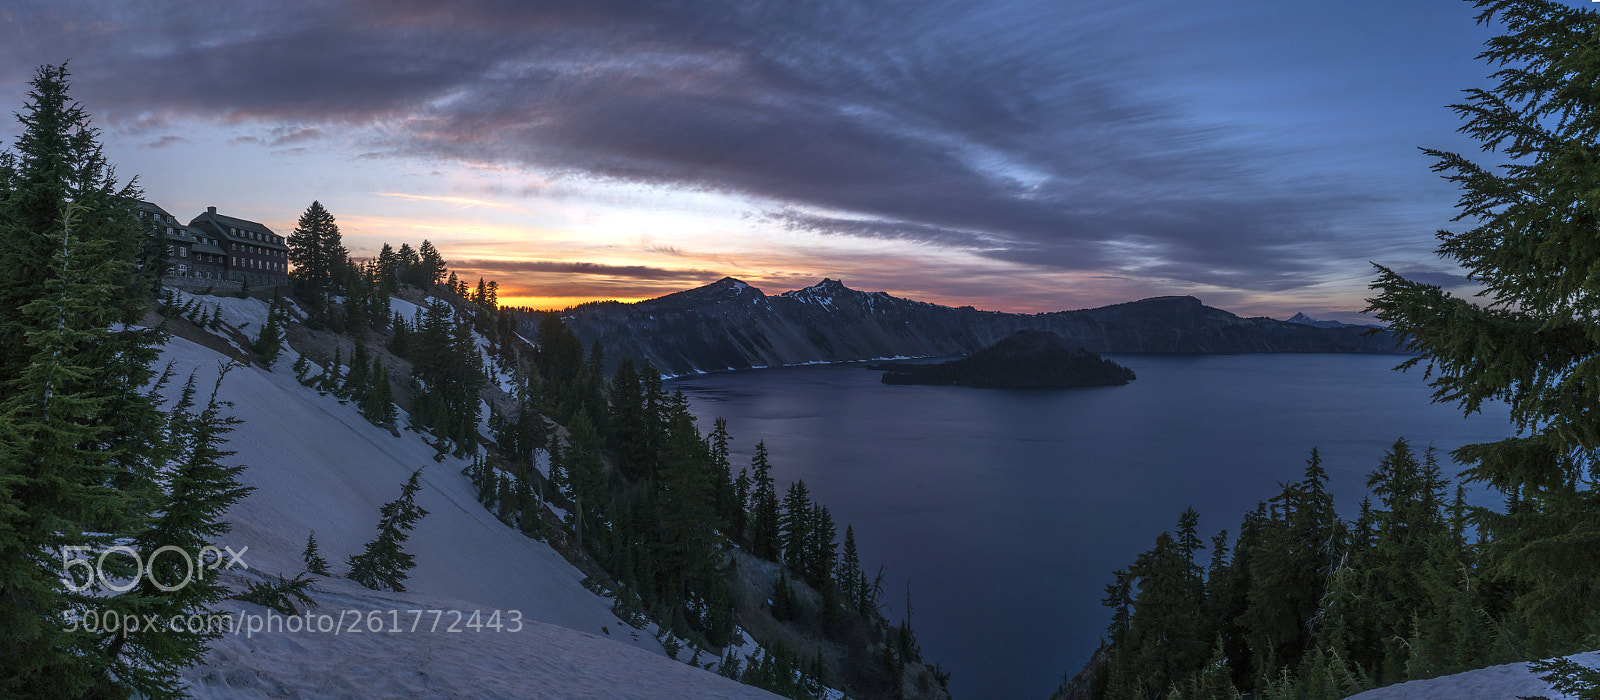 Sony a7R II sample photo. Crater lake sunset panorama photography